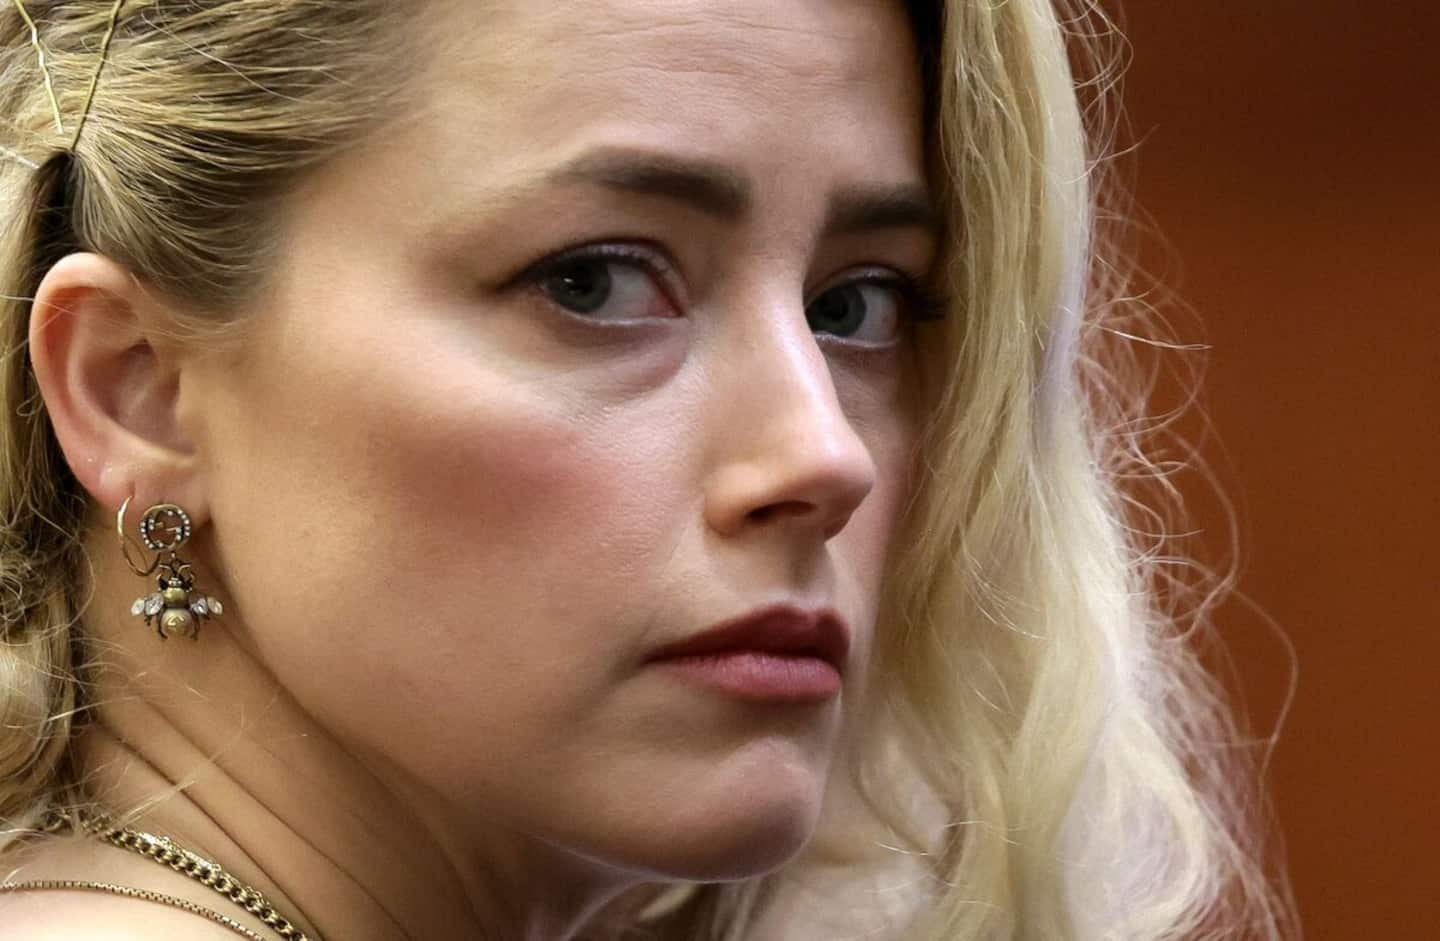 Amber Heard is not a 'perfect victim'